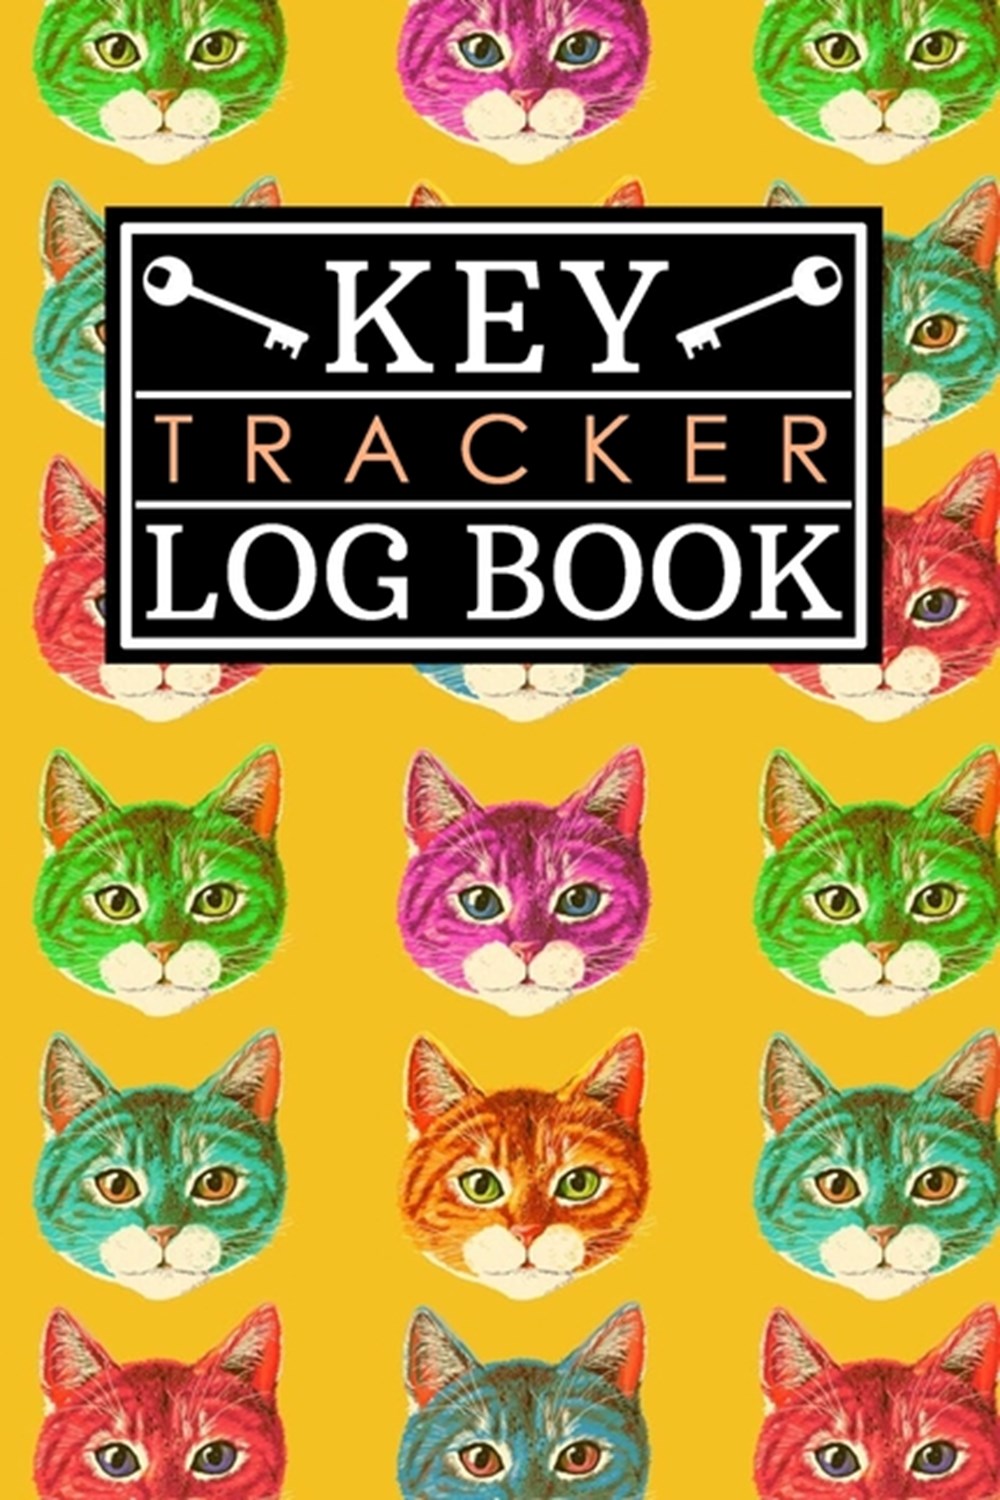 Key Tracker Log Book Cute Colorful Animal Cat Pattern in Yellow Cover Gift